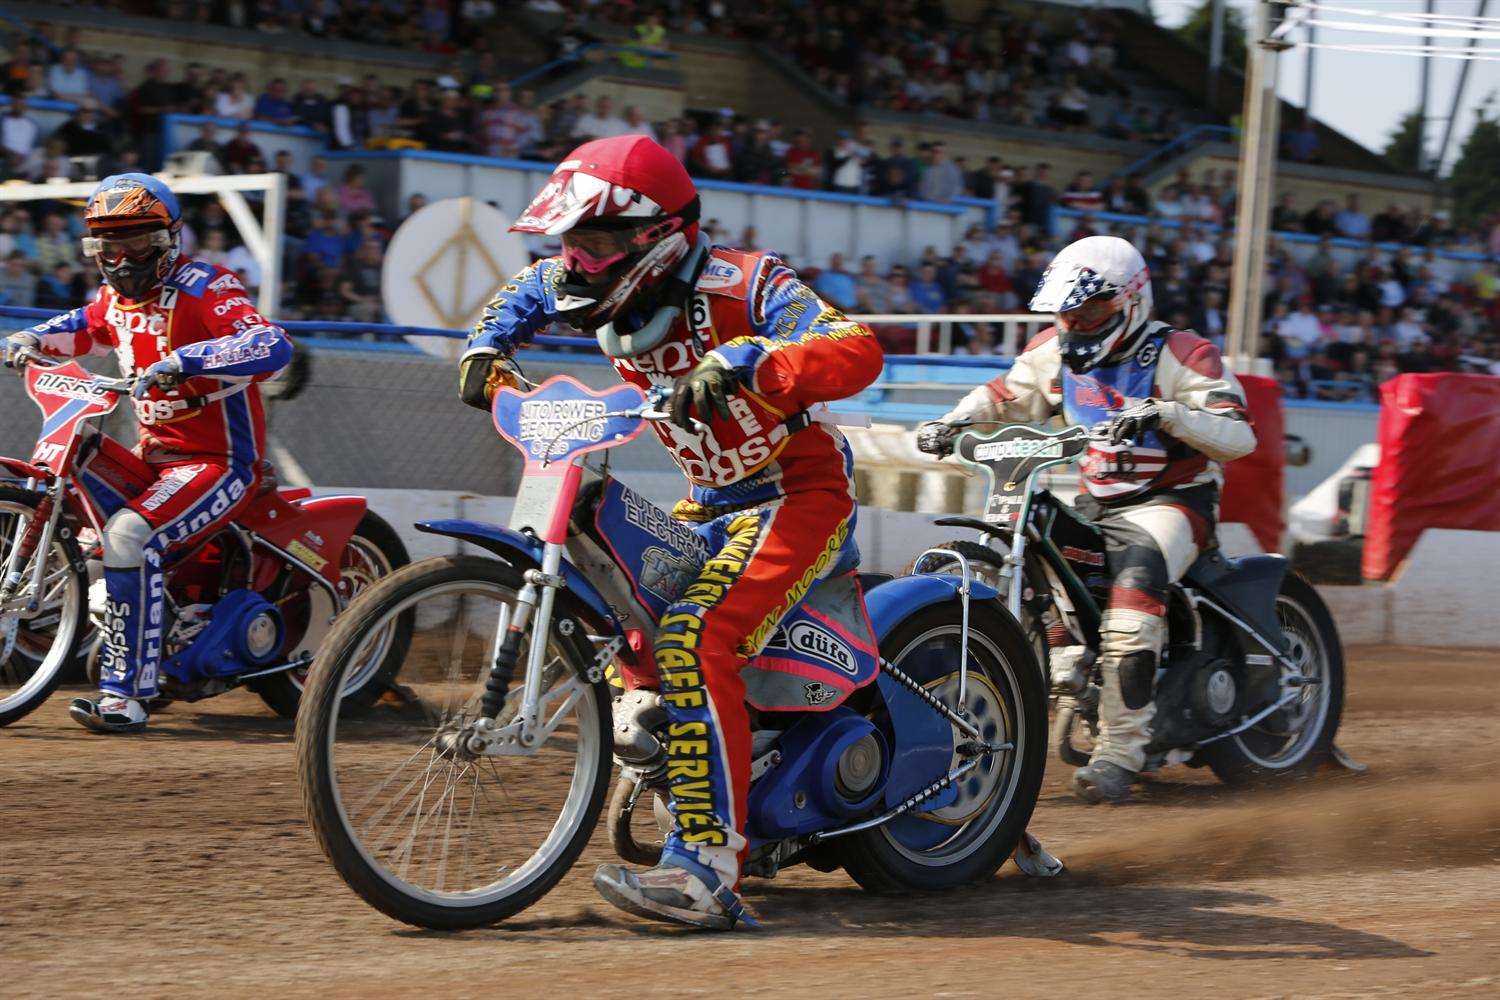 Speedway riders in action at Central Park Stadium.